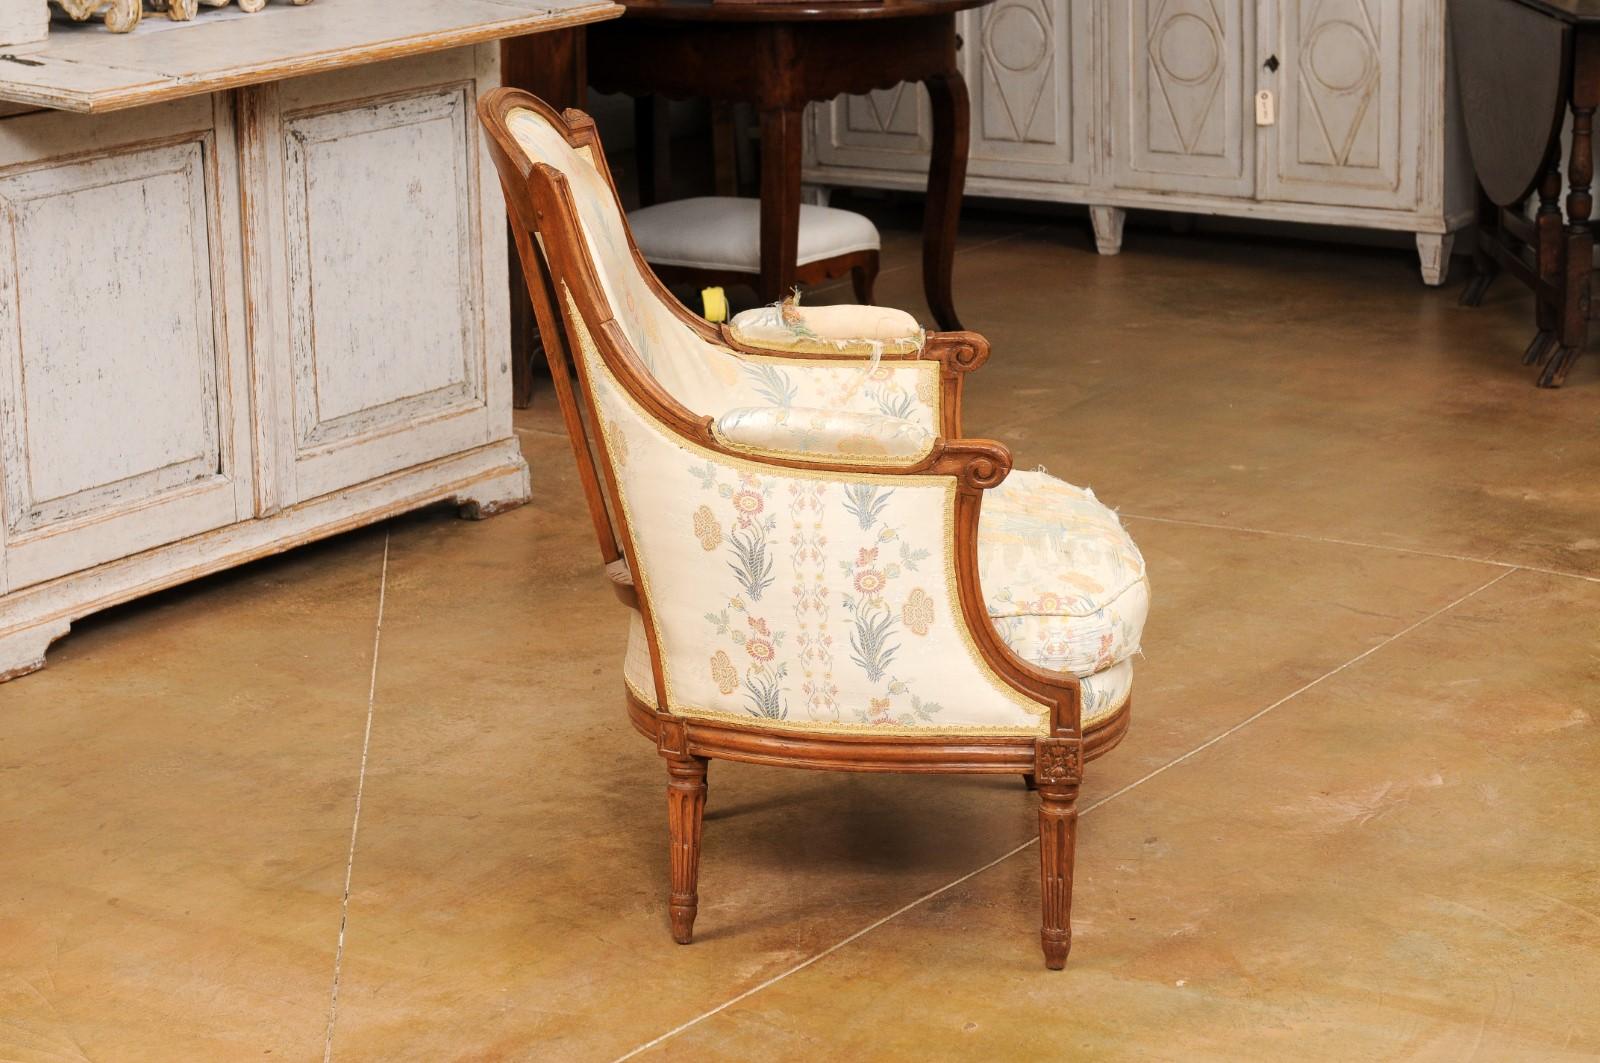 French Louis XVI Period Late 18th Century Walnut Bergère Chair with Curving Back For Sale 1